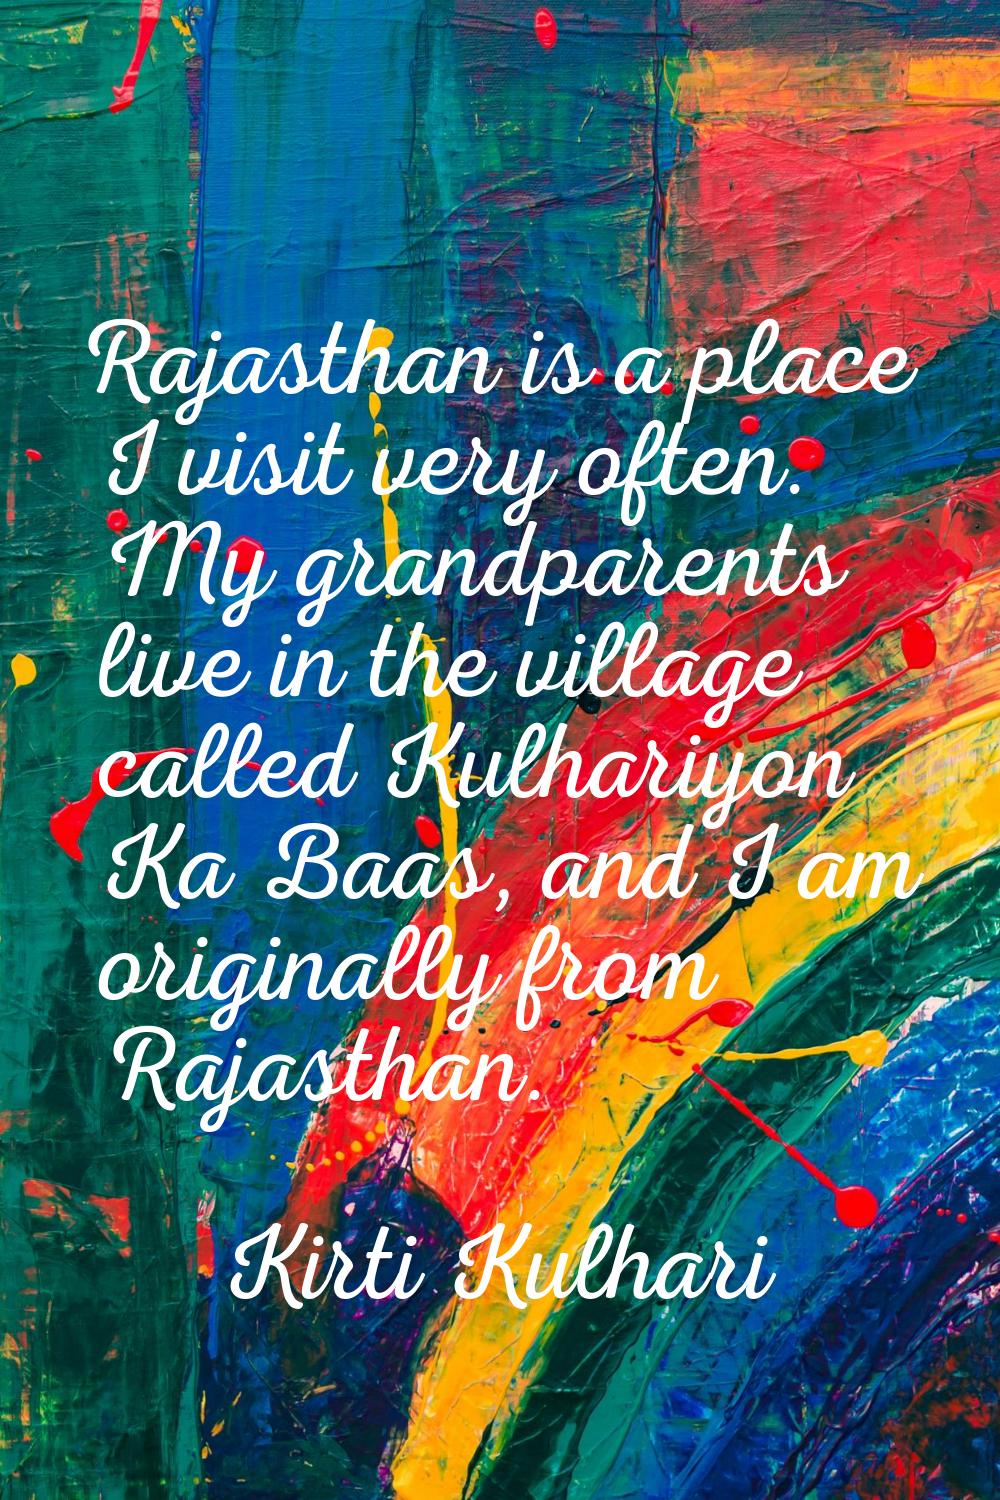 Rajasthan is a place I visit very often. My grandparents live in the village called Kulhariyon Ka B